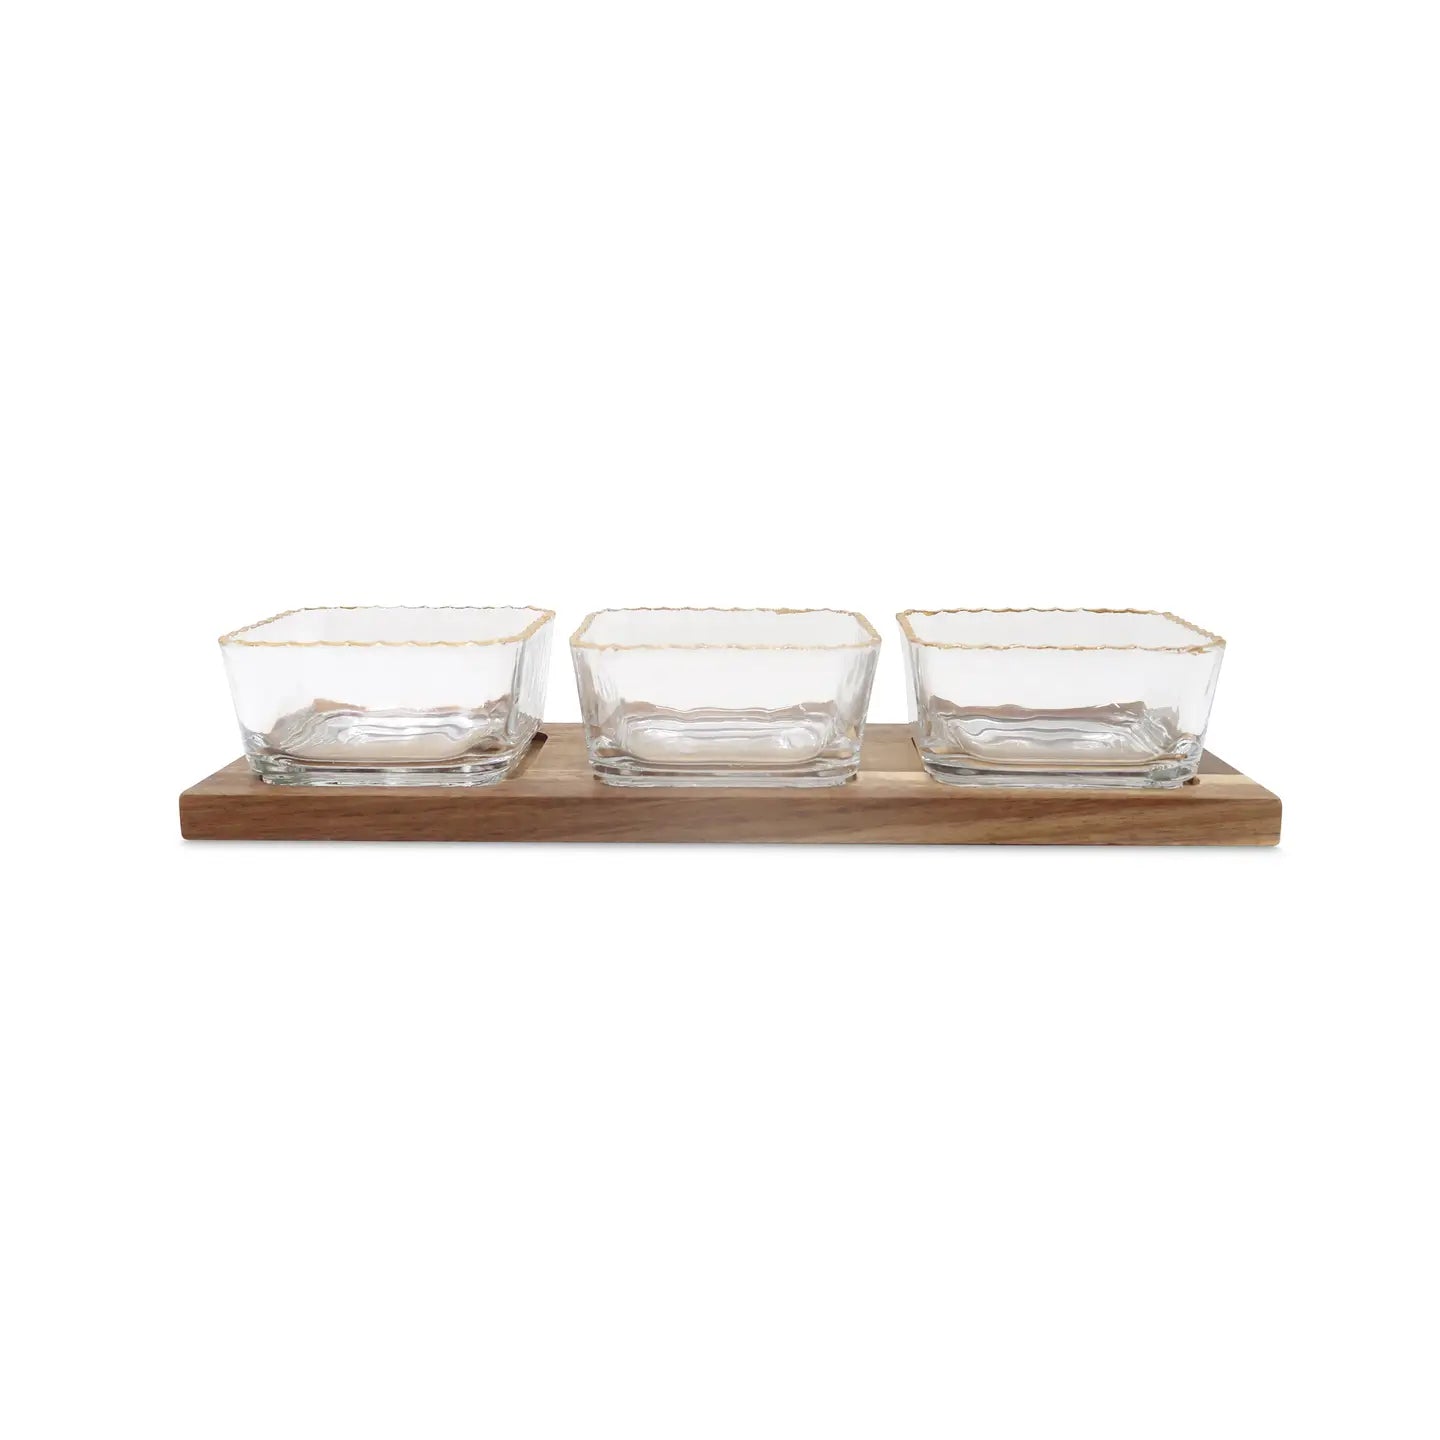 3 Square Glass Bowl Sauce Dish with Wooden Base Snack Bowls High Class Touch - Home Decor 